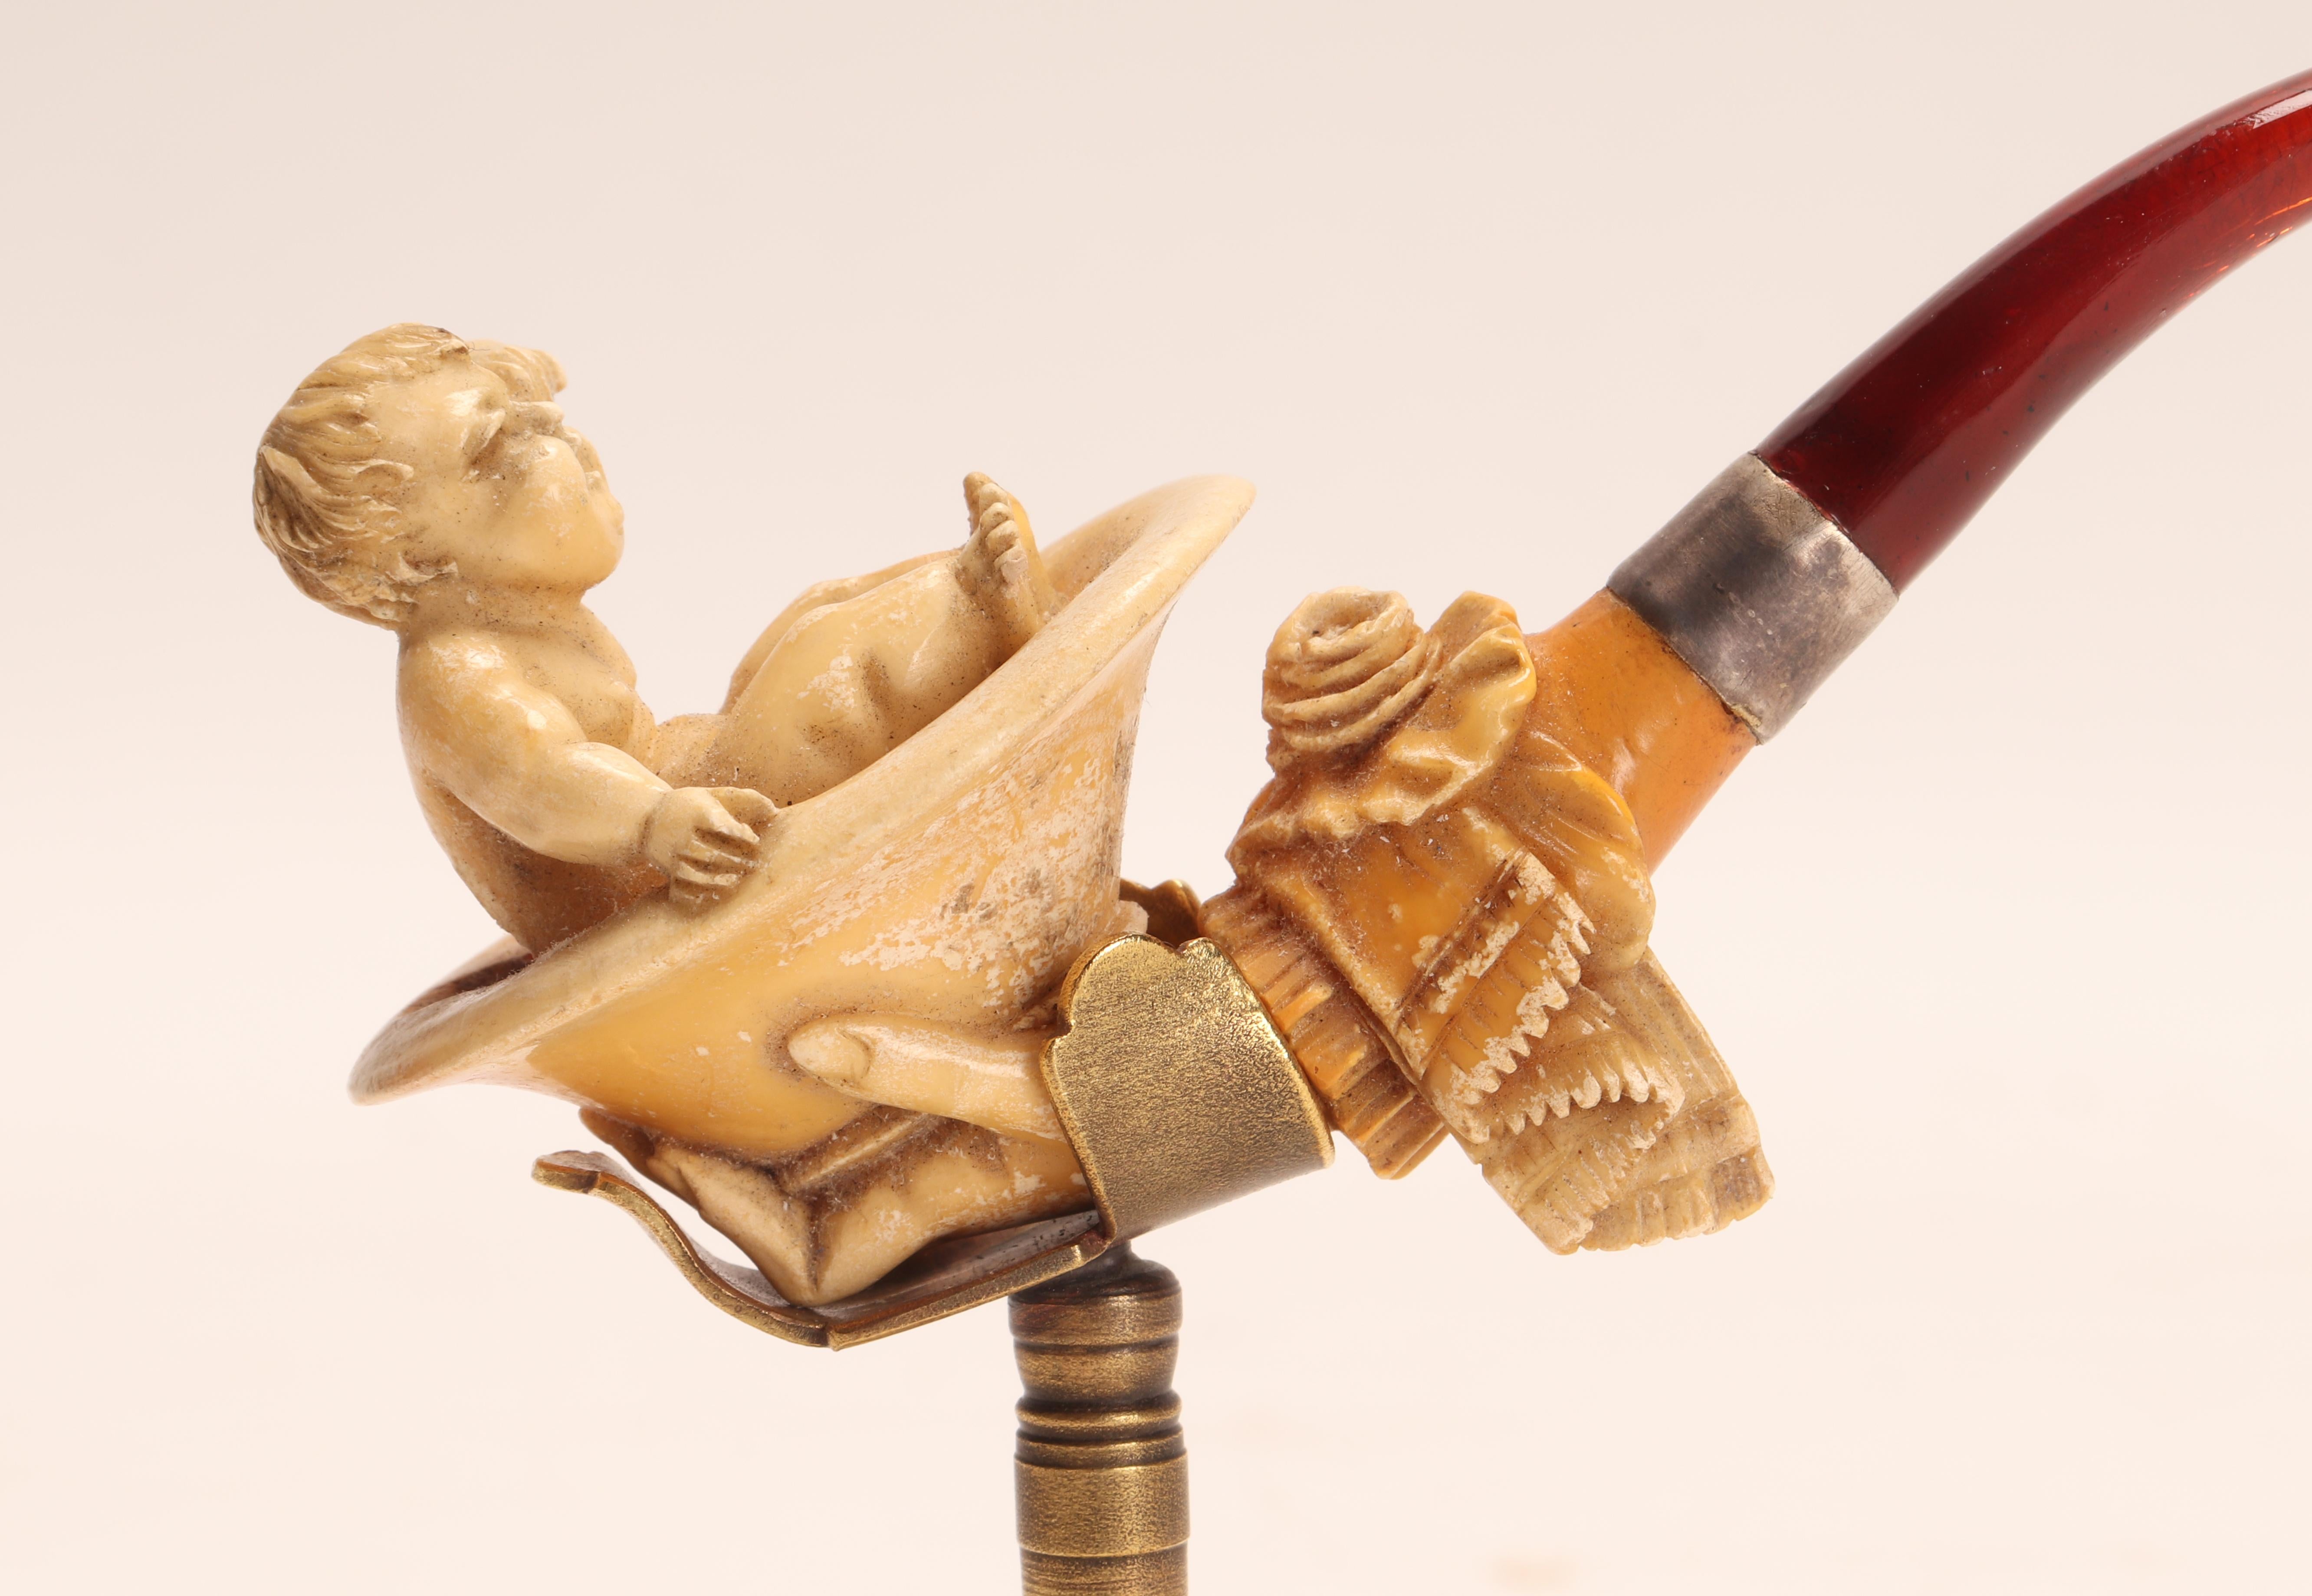 Tobacco taster pipe, made out of carved meershaum, with silver and amber mouthpiece with a silver band. One hand holds a tub where a child is sitting. Original case. Vienna, Austria circa 1880. (The stand is for photographic use only, not for sale).